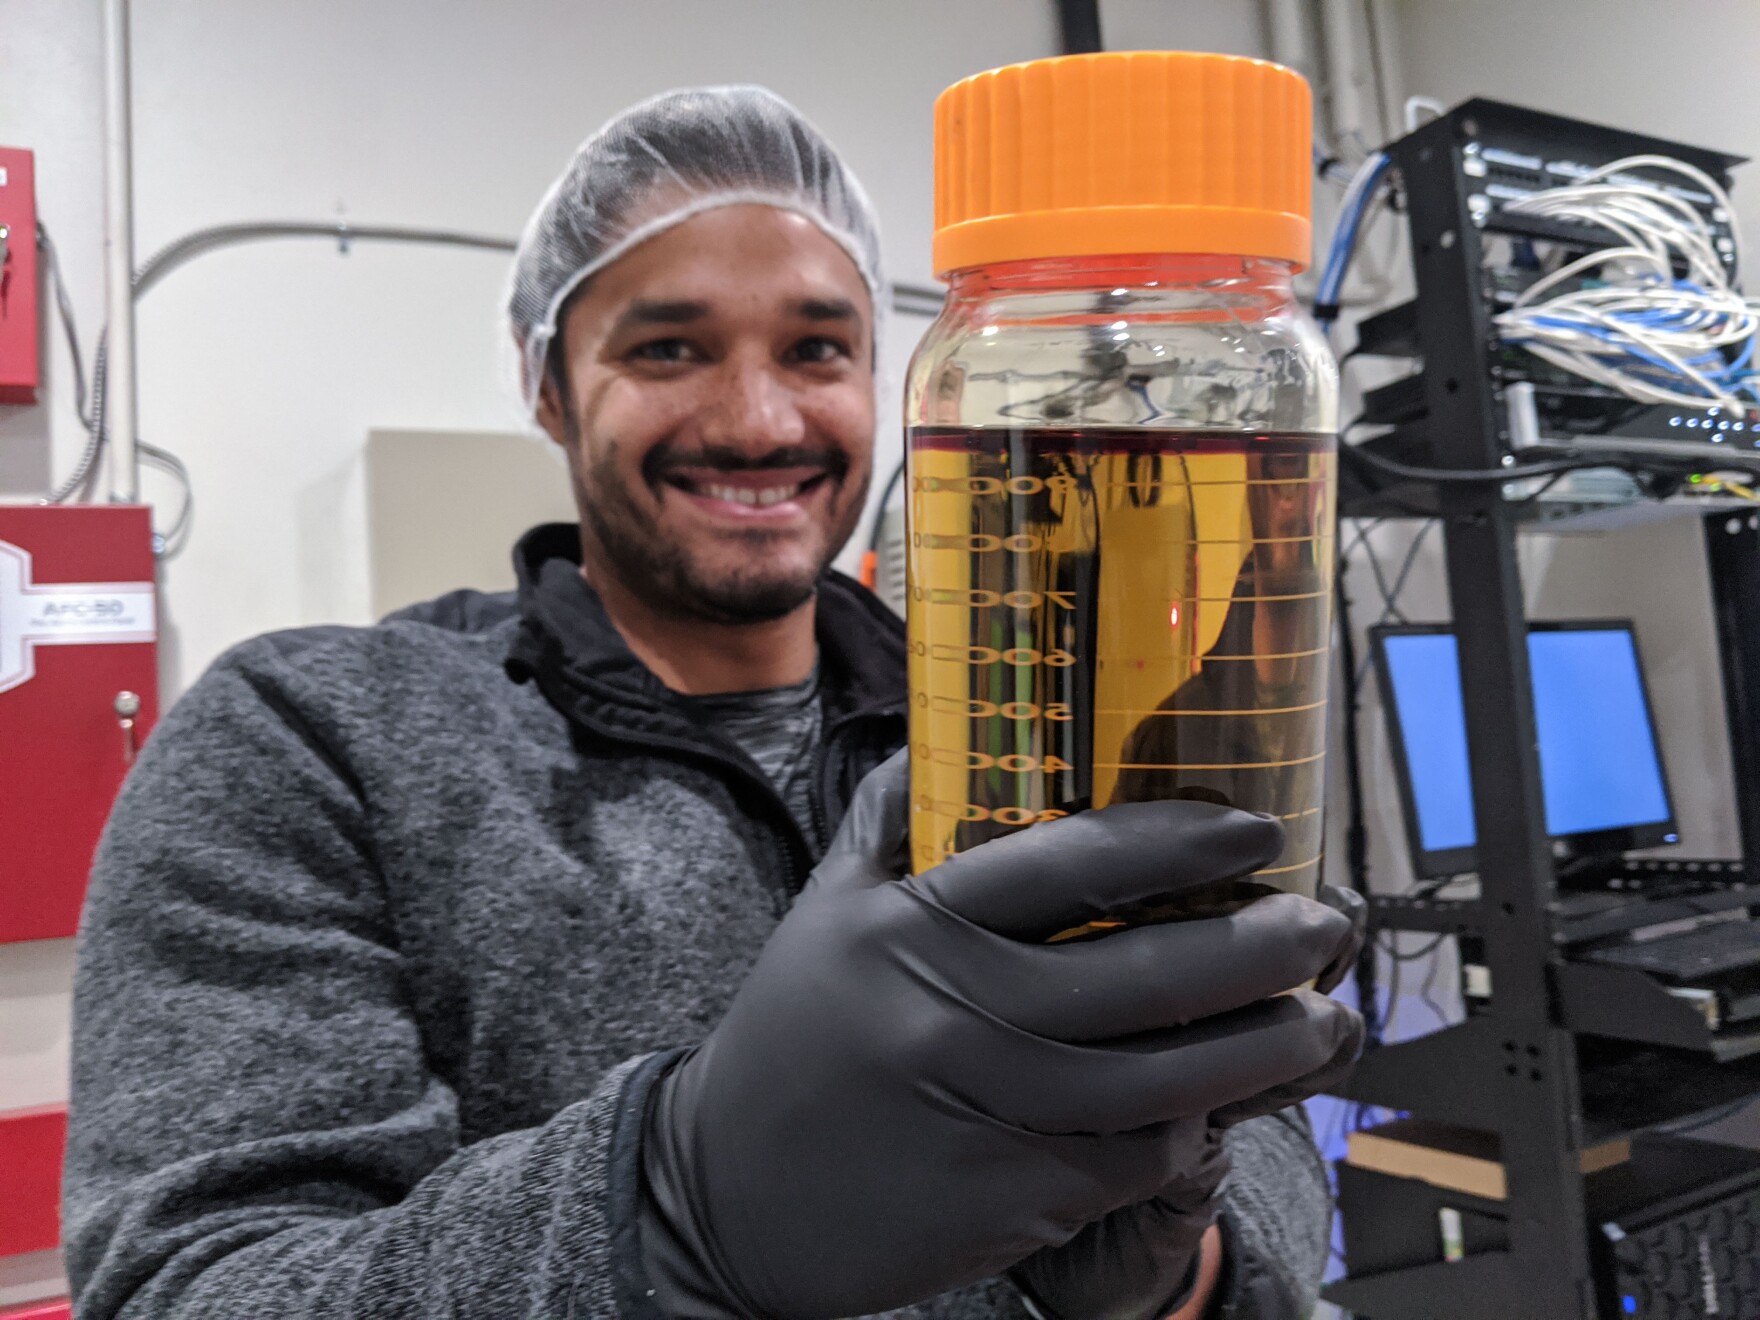 a smiling man wearing gloves and a hair net holds up a large glass jar filled with a yellow liquid